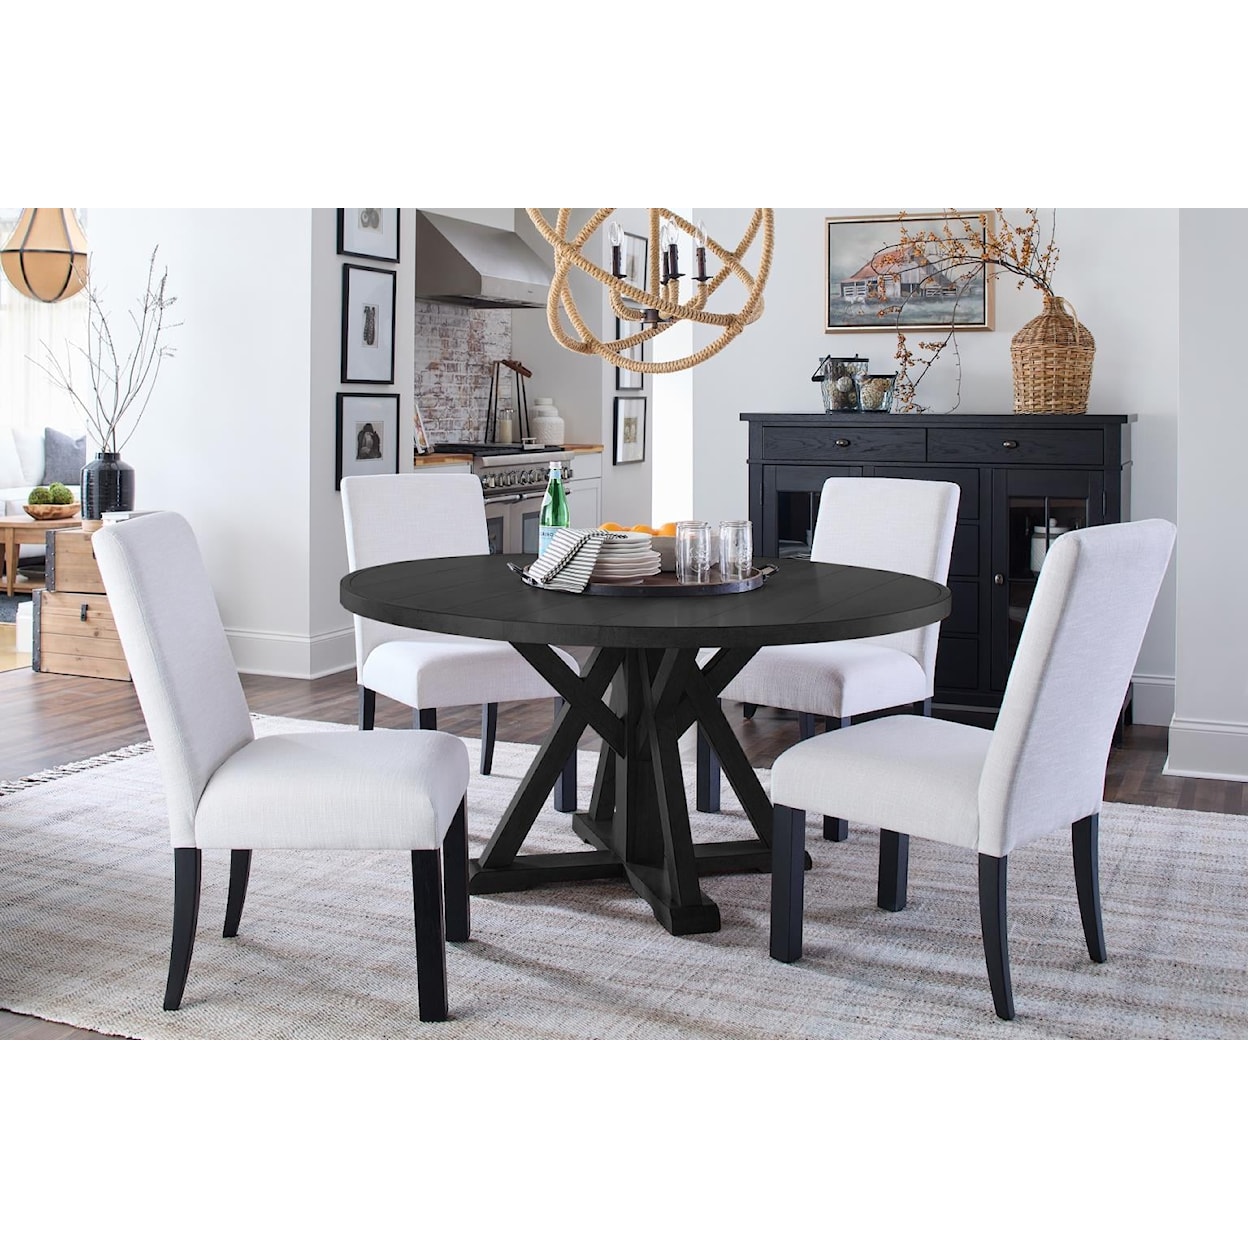 Trisha Yearwood Home Collection by Legacy Classic Today's Traditions 5-Piece Dining Set